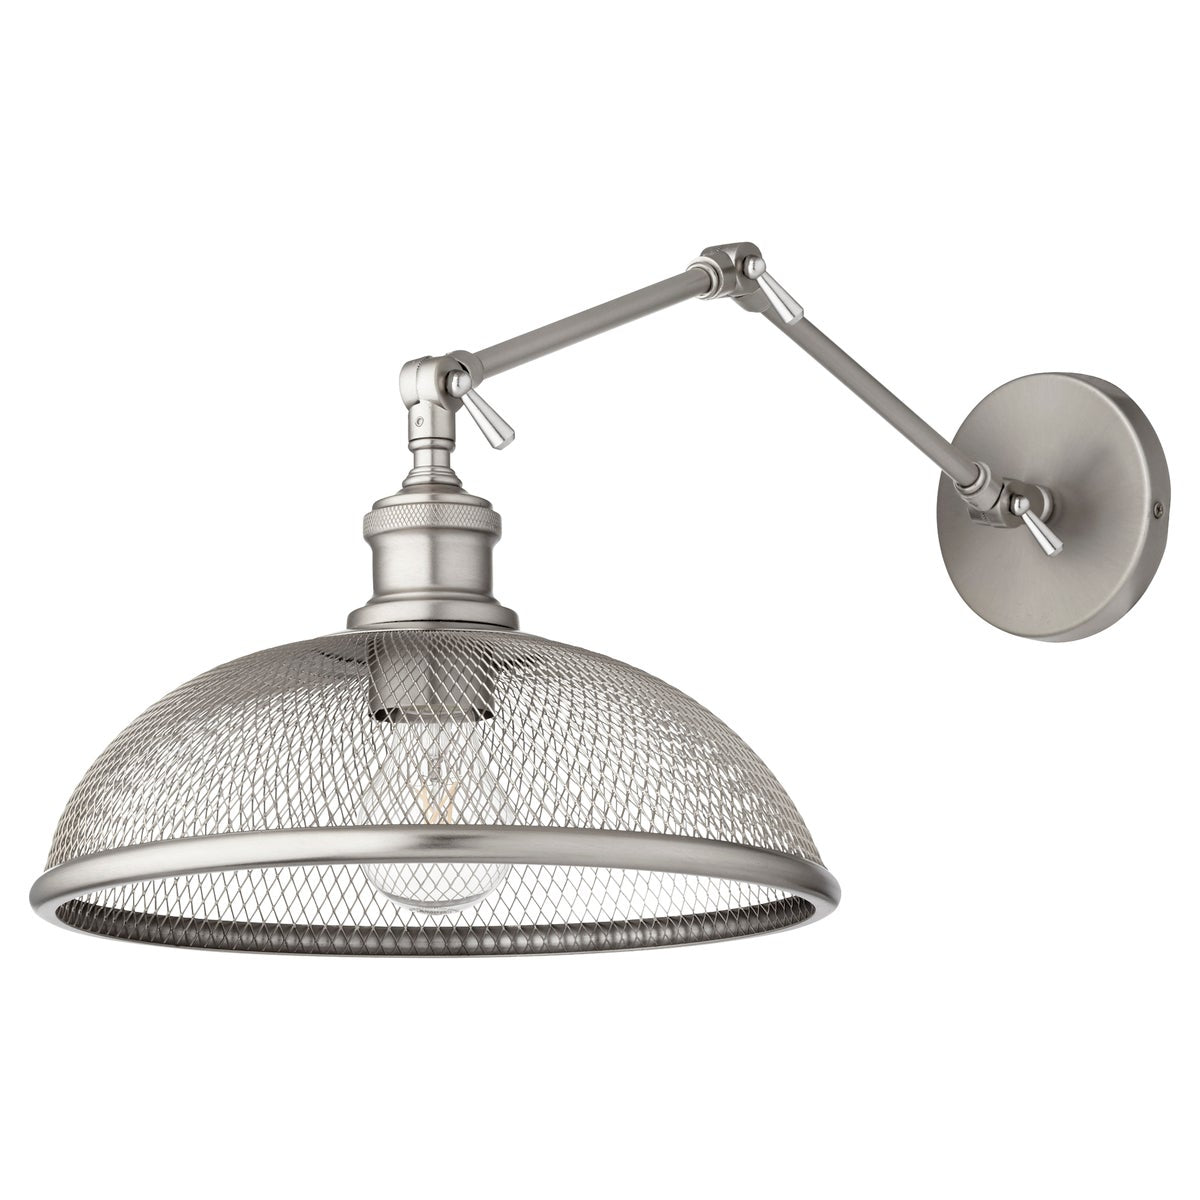 Industrial Wall Sconce with Mesh Shade, showcasing crisscross patterns and subtle shading bulbs. Versatile and transitional, perfect for contemporary and traditional settings. Brand: Quorum International. Wattage: 100W. Input Voltage: 120V. Bulbs: 1 (not included). Bulb Base Type: Medium E26. Dimmable. Certifications: UL Listed. Safety Rating: Damp Location. Finish: Aged Brass, Noir, Satin Nickel. Dimensions: 12"W x 11.5"H x 24"E. Warranty: 2 Years.